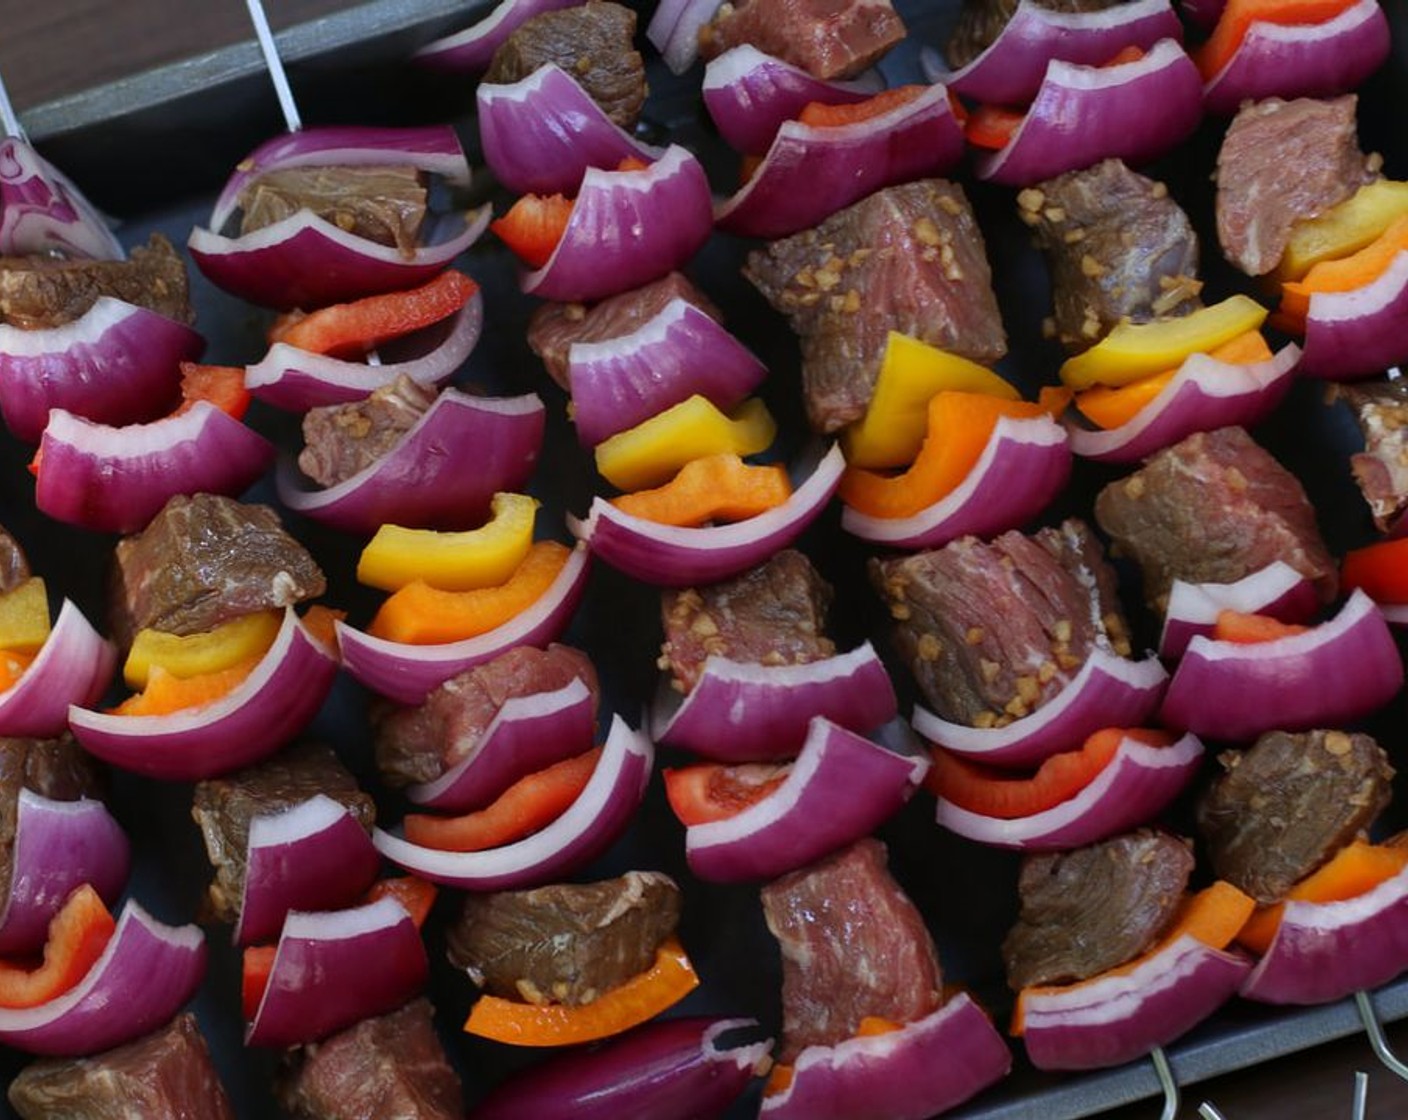 step 9 If using wooden skewers, soak in water for at least 30 minutes before grilling or broiling. If using metal skewers, skewer away. Thread marinated beef and Red Bell Peppers (2), Orange Bell Peppers (2), Yellow Bell Peppers (2), and Red Onion (1) onto skewers.